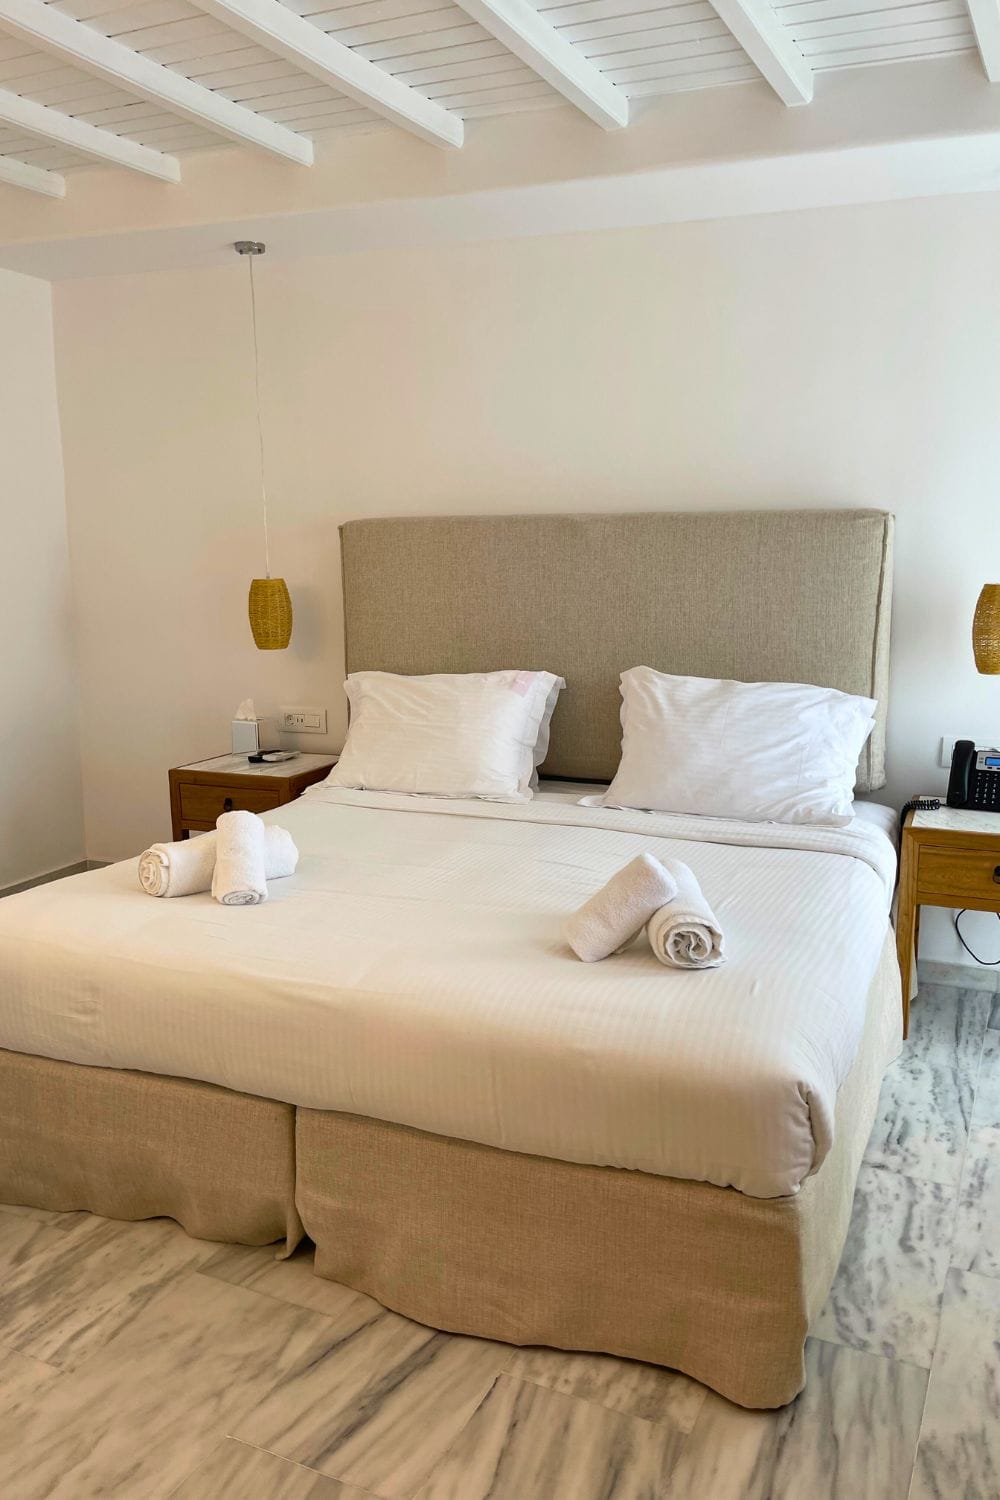 A neatly made bed with a large beige headboard in a hotel room in Mykonos. The room features white walls, a white ceiling with exposed wooden beams, and a hanging pendant light with a natural fiber weave. The clean and simple design offers a serene and inviting atmosphere.